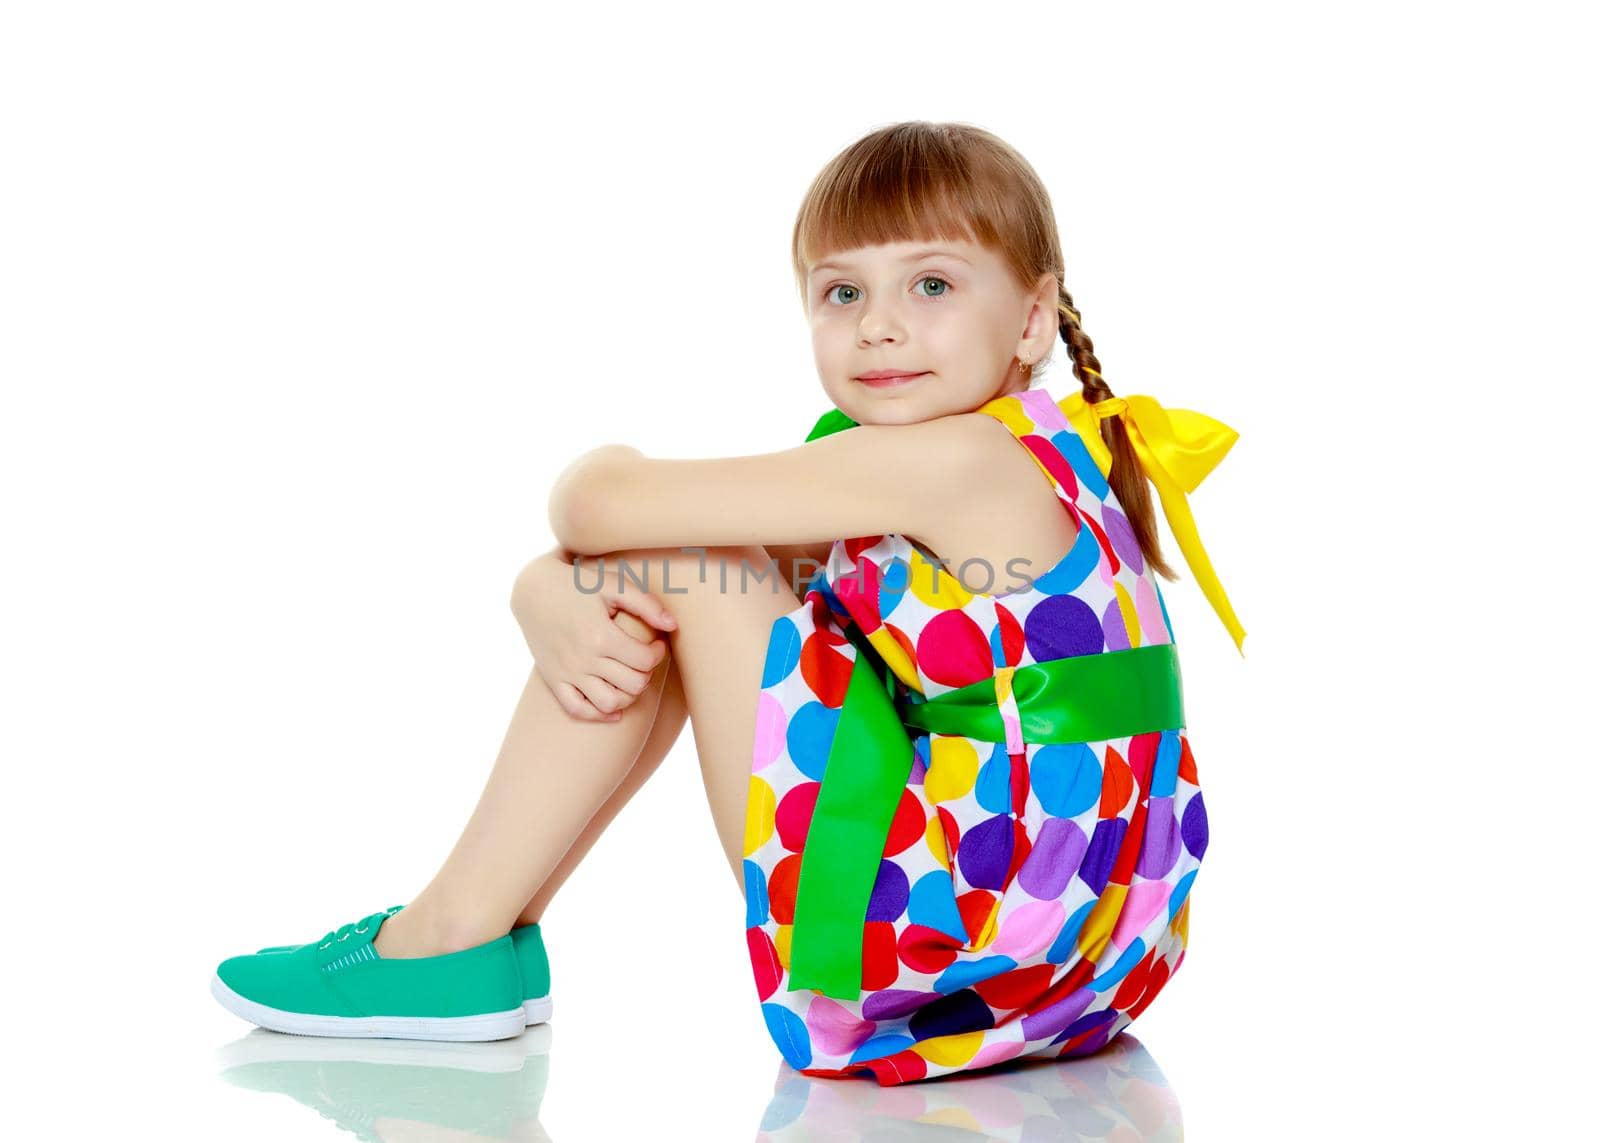 A little girl in a dress with a pattern from multi-colored circl by kolesnikov_studio